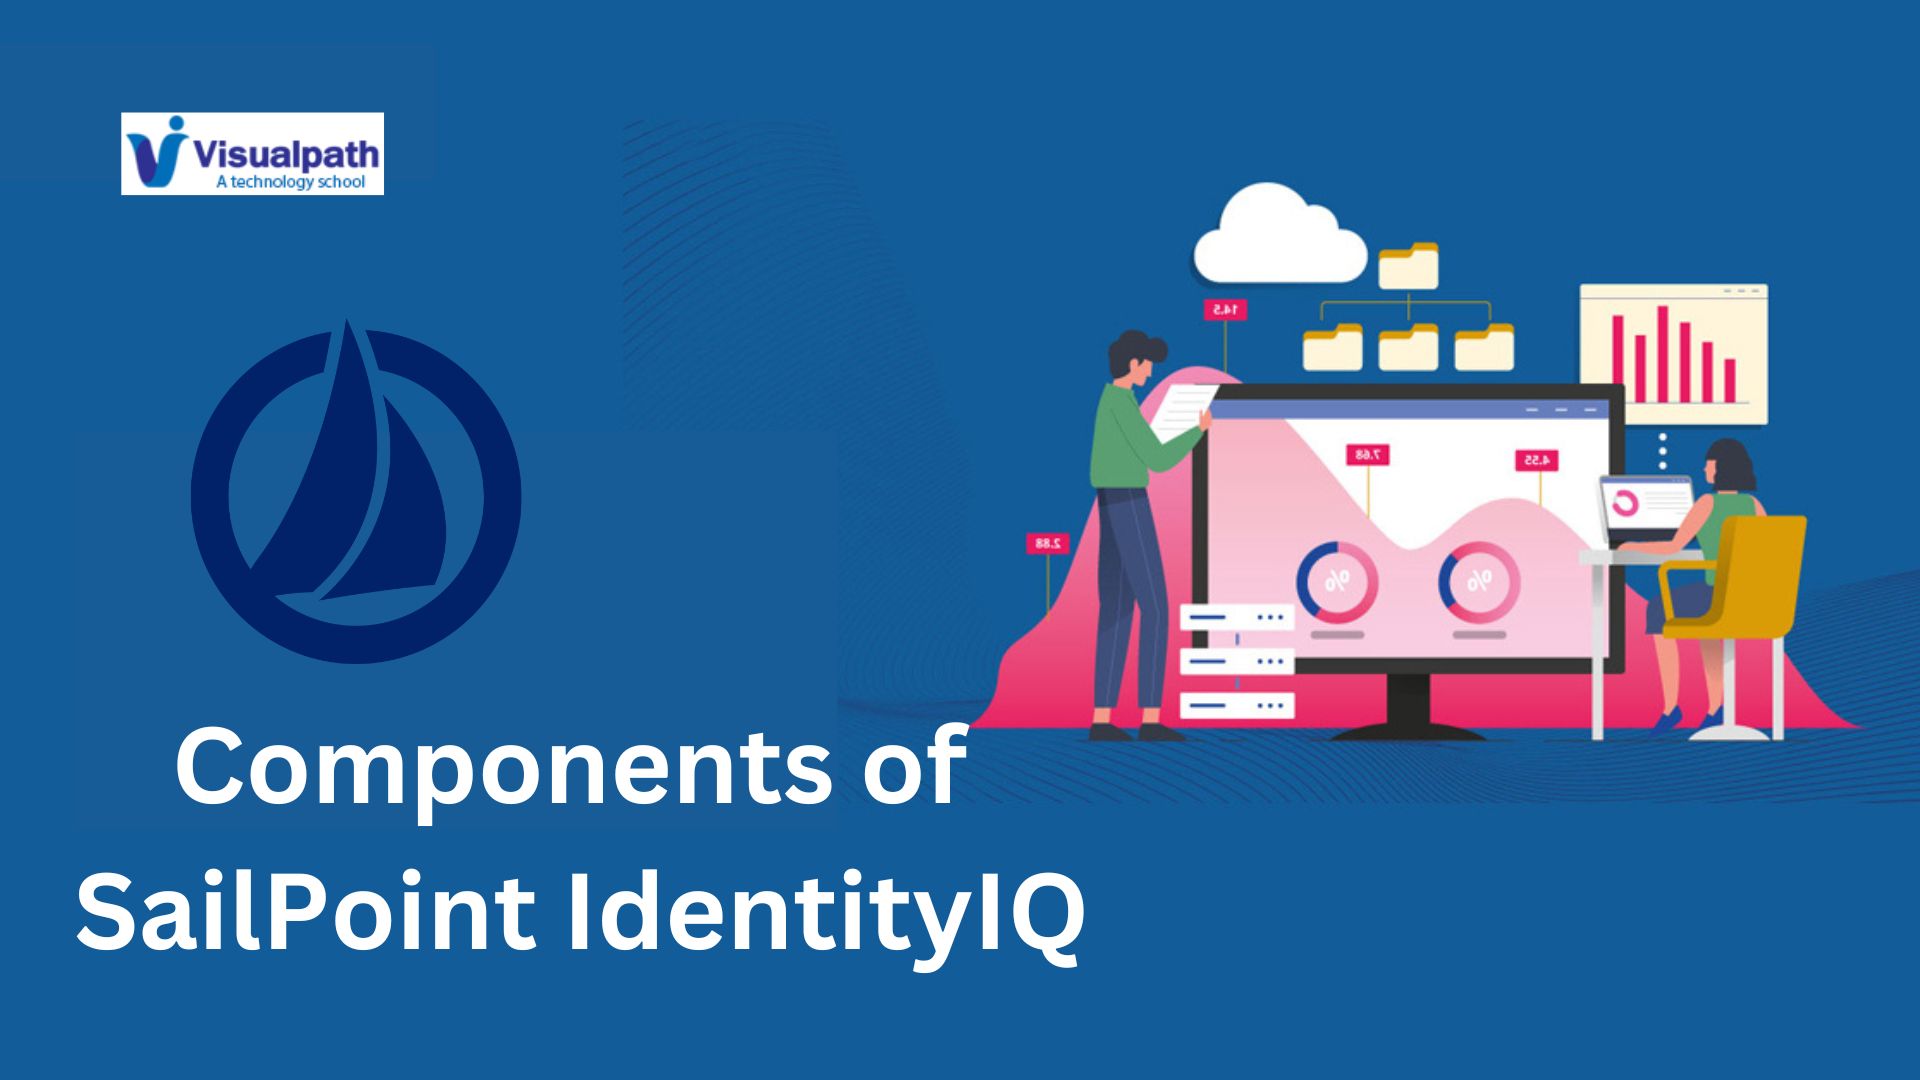 Components of SailPoint IdentityIQ: Identity Governance and Administration